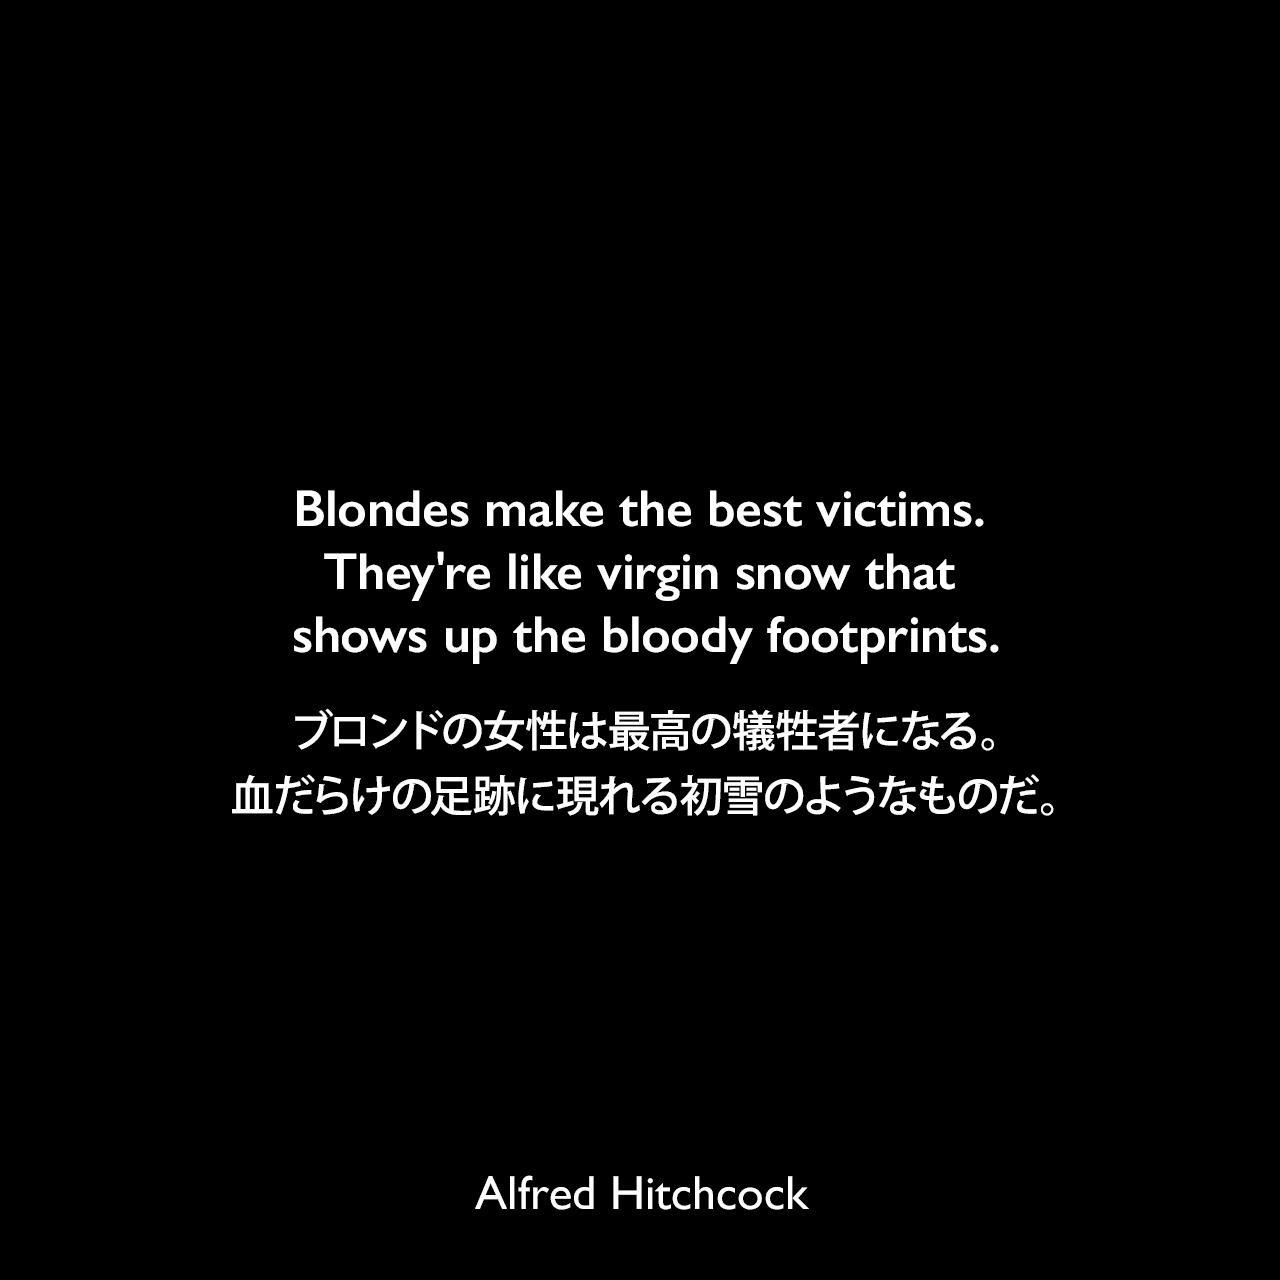 Blondes make the best victims. They're like virgin snow that shows up the bloody footprints.ブロンドの女性は最高の犠牲者になる。血だらけの足跡に現れる初雪のようなものだ。- 1977年2月CBS TVのインタビューよりAlfred Hitchcock